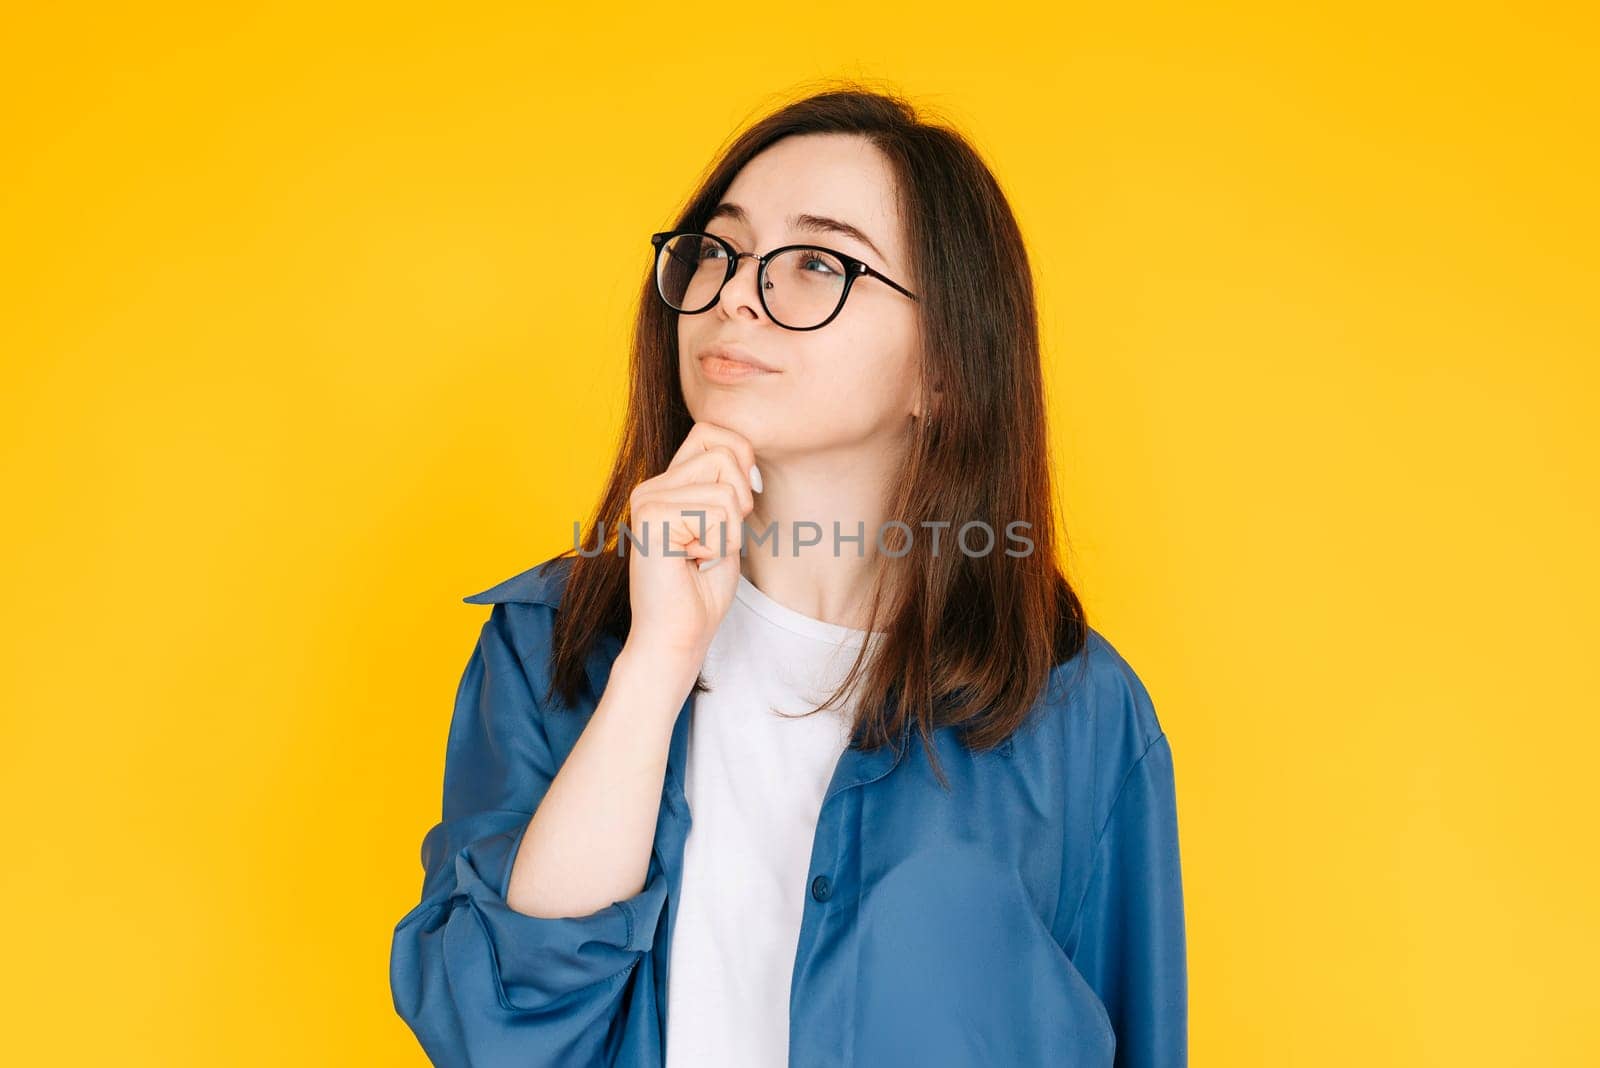 Smart Shopping Decision: Stylish and Thoughtful Woman Considering New Product Purchase, Arm on Face Pose - Fashionable Consumer Concept Isolated on Yellow Background.